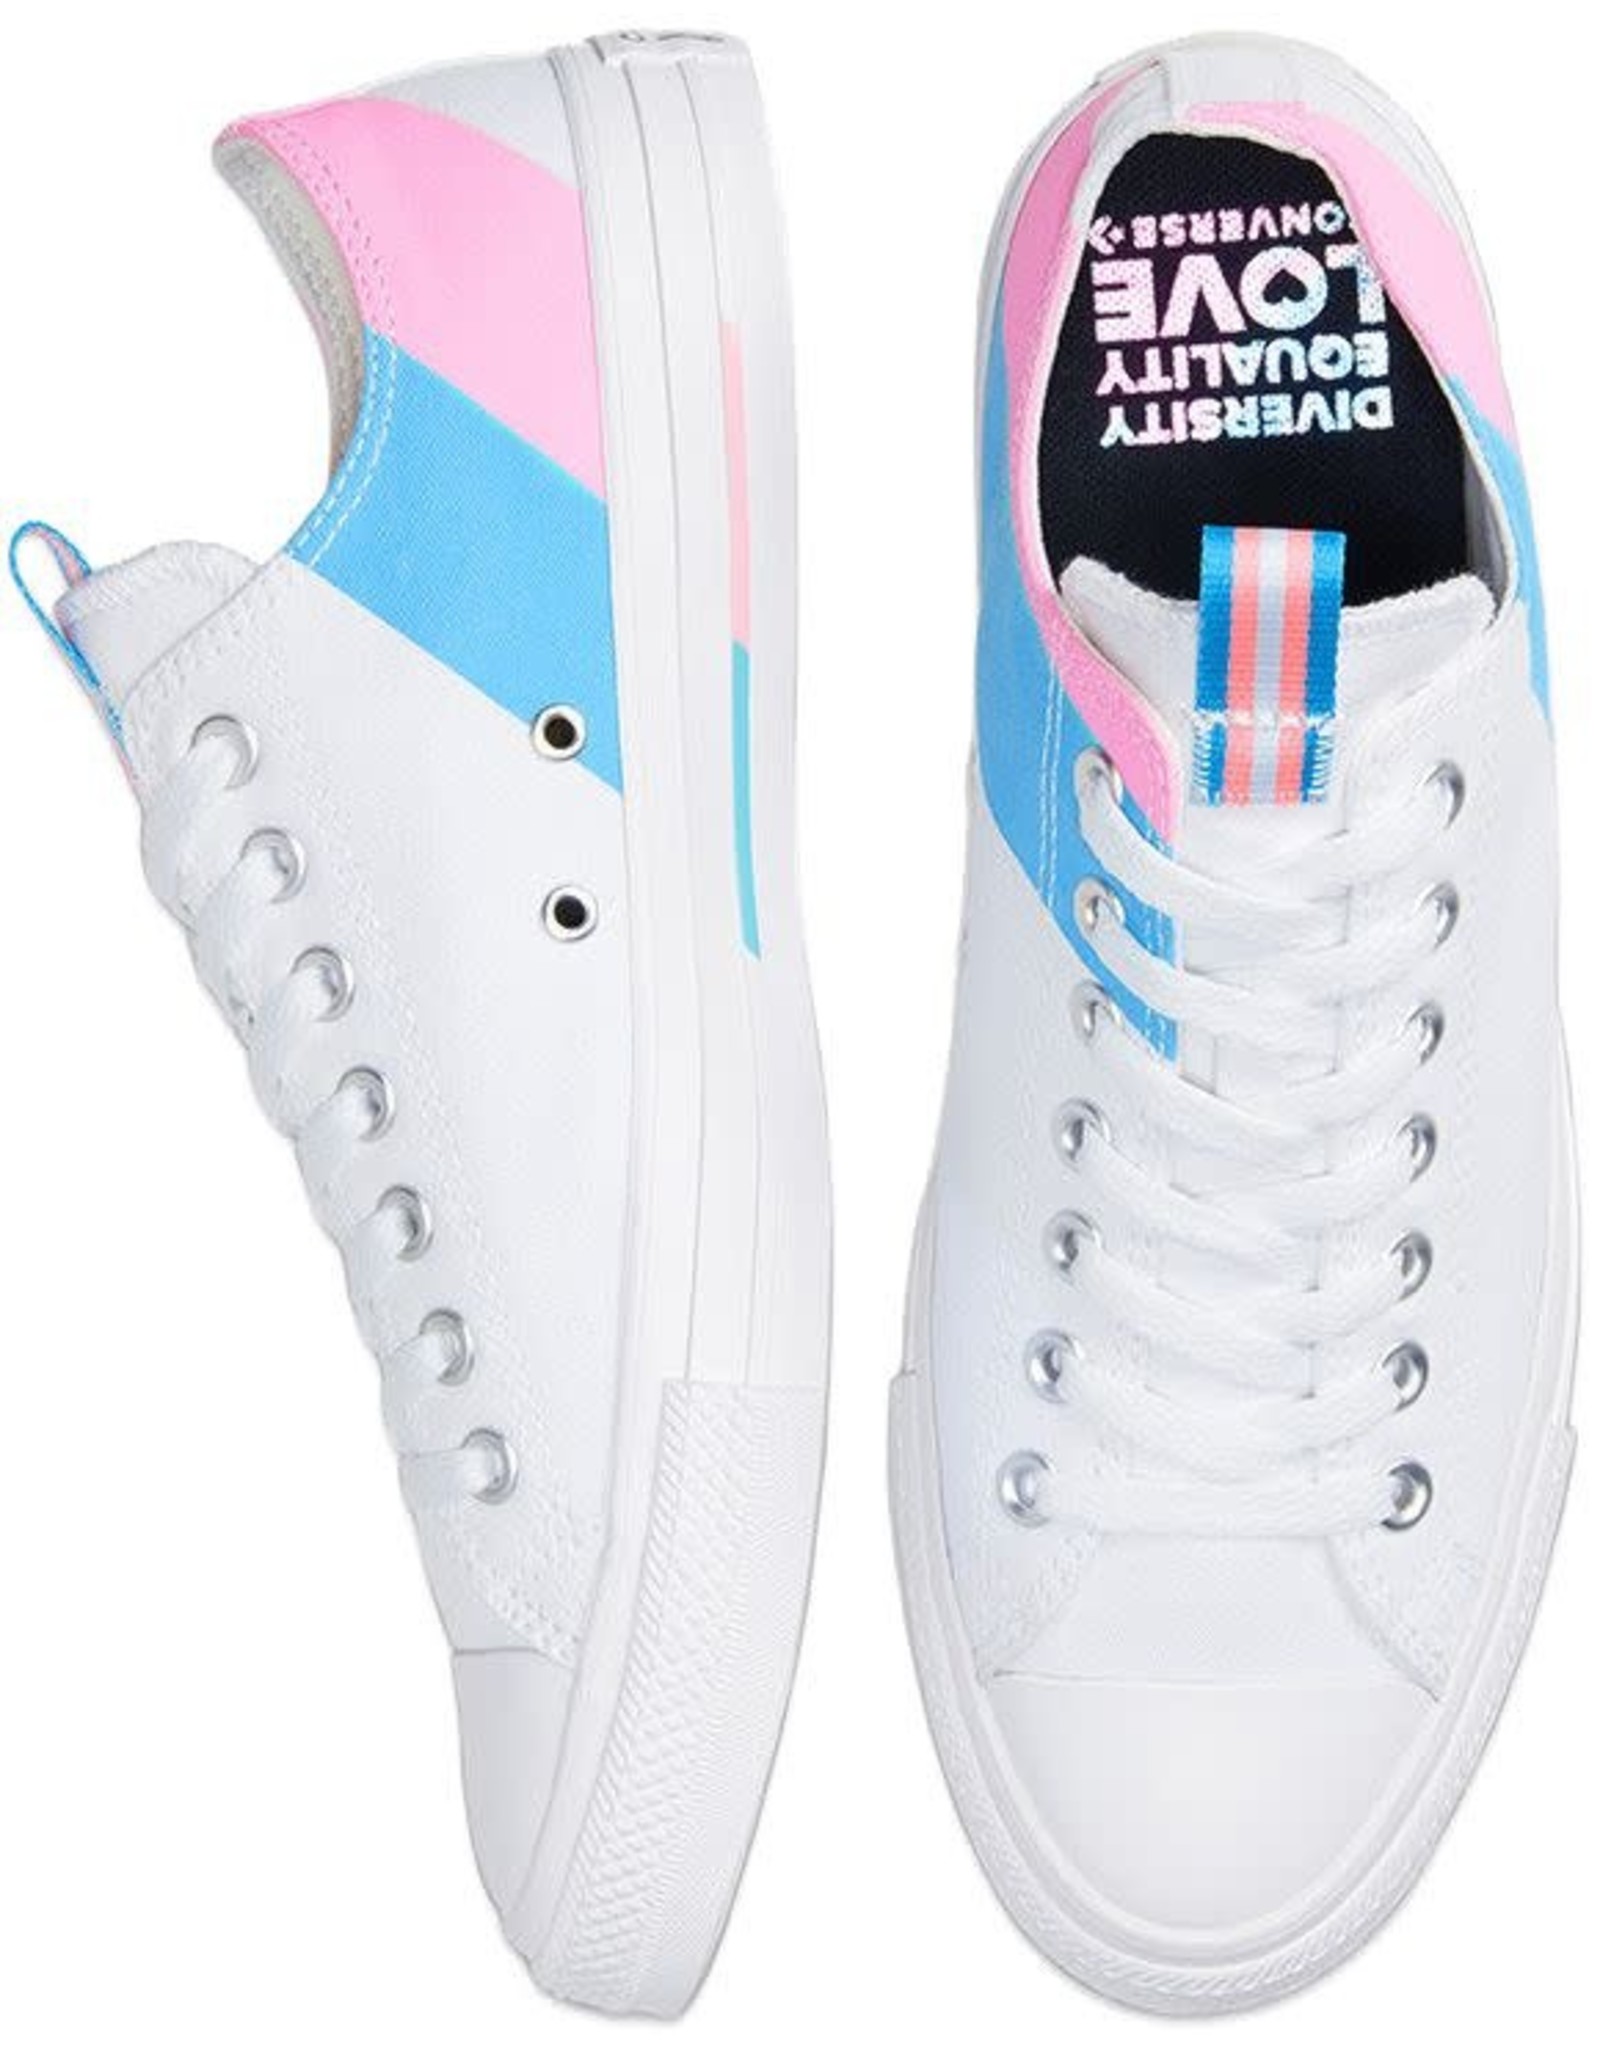 CHUCK TAYLOR OX WHITE/90S PINK/GNARLY BLUE C14TRA-167760C